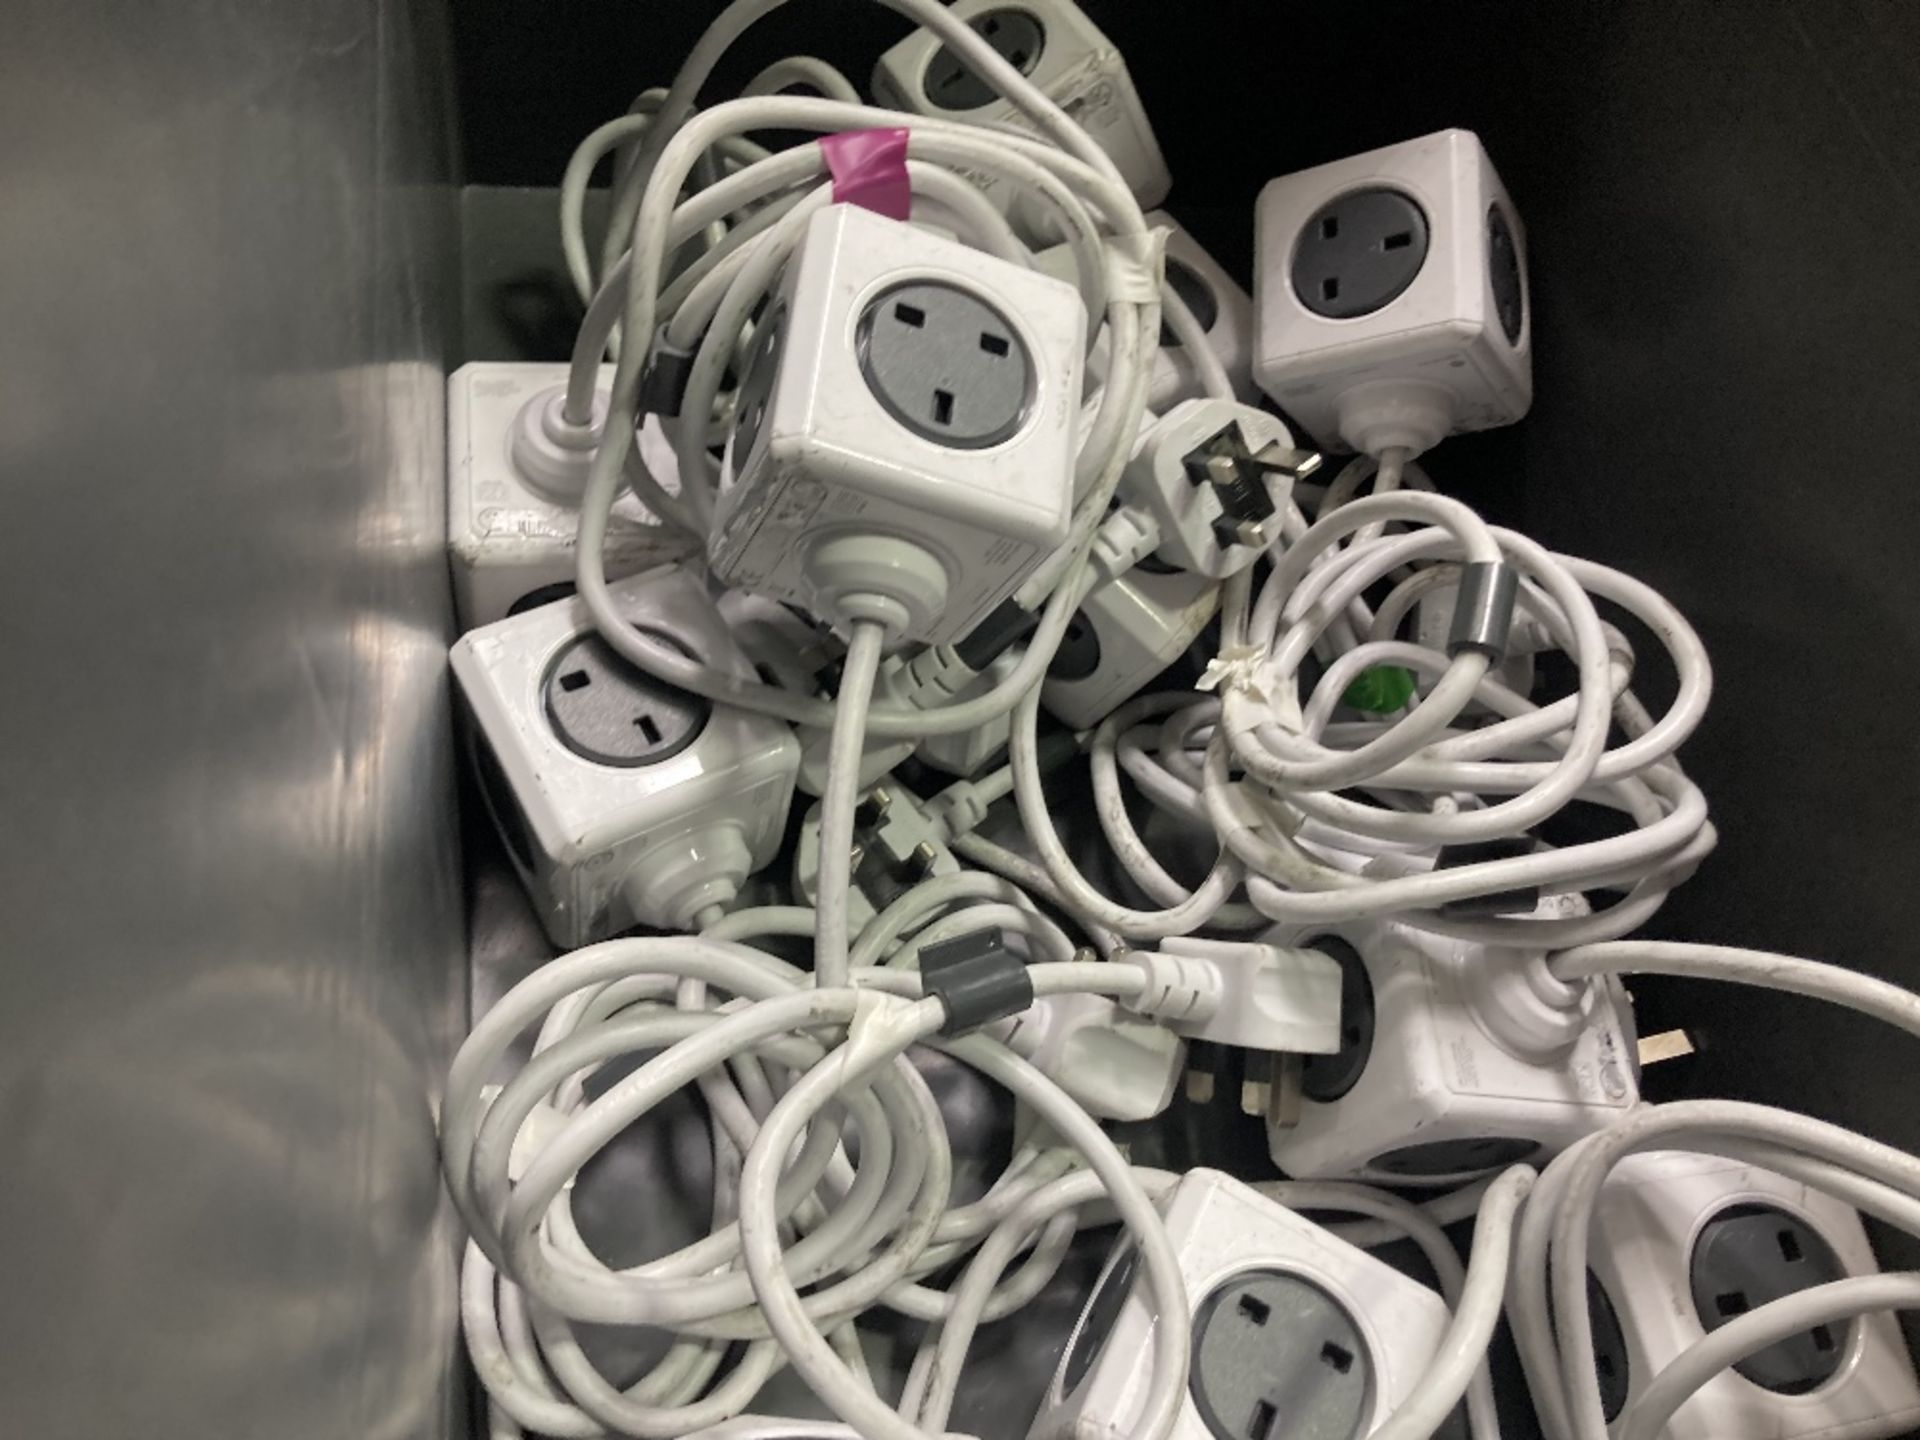 Large Quantity Of 13amp 4-Way Powercube + 2x USB Cable Adapters With Plastic Lin Bins - Image 6 of 8